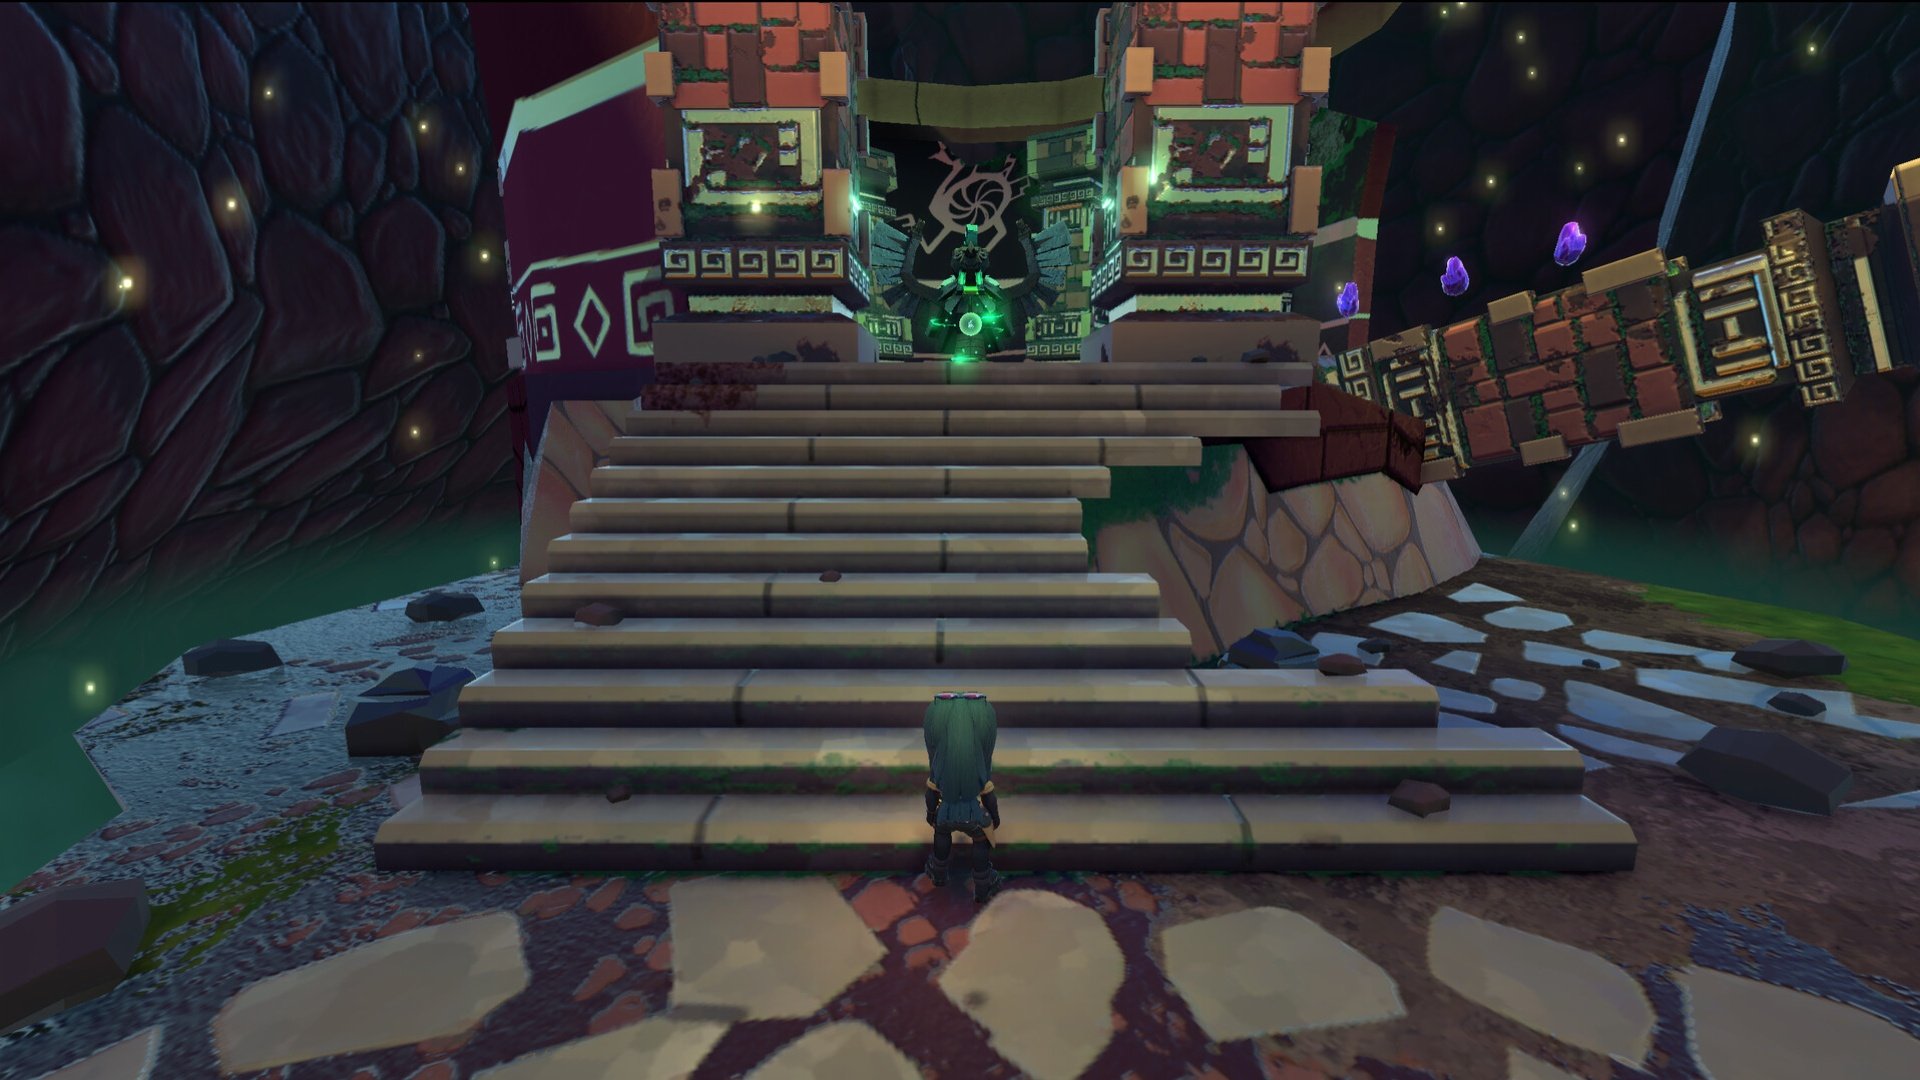 A player climbing on the steps of seemingly ruined palace. Image is from game Runa & the Chaikurú Legacy.